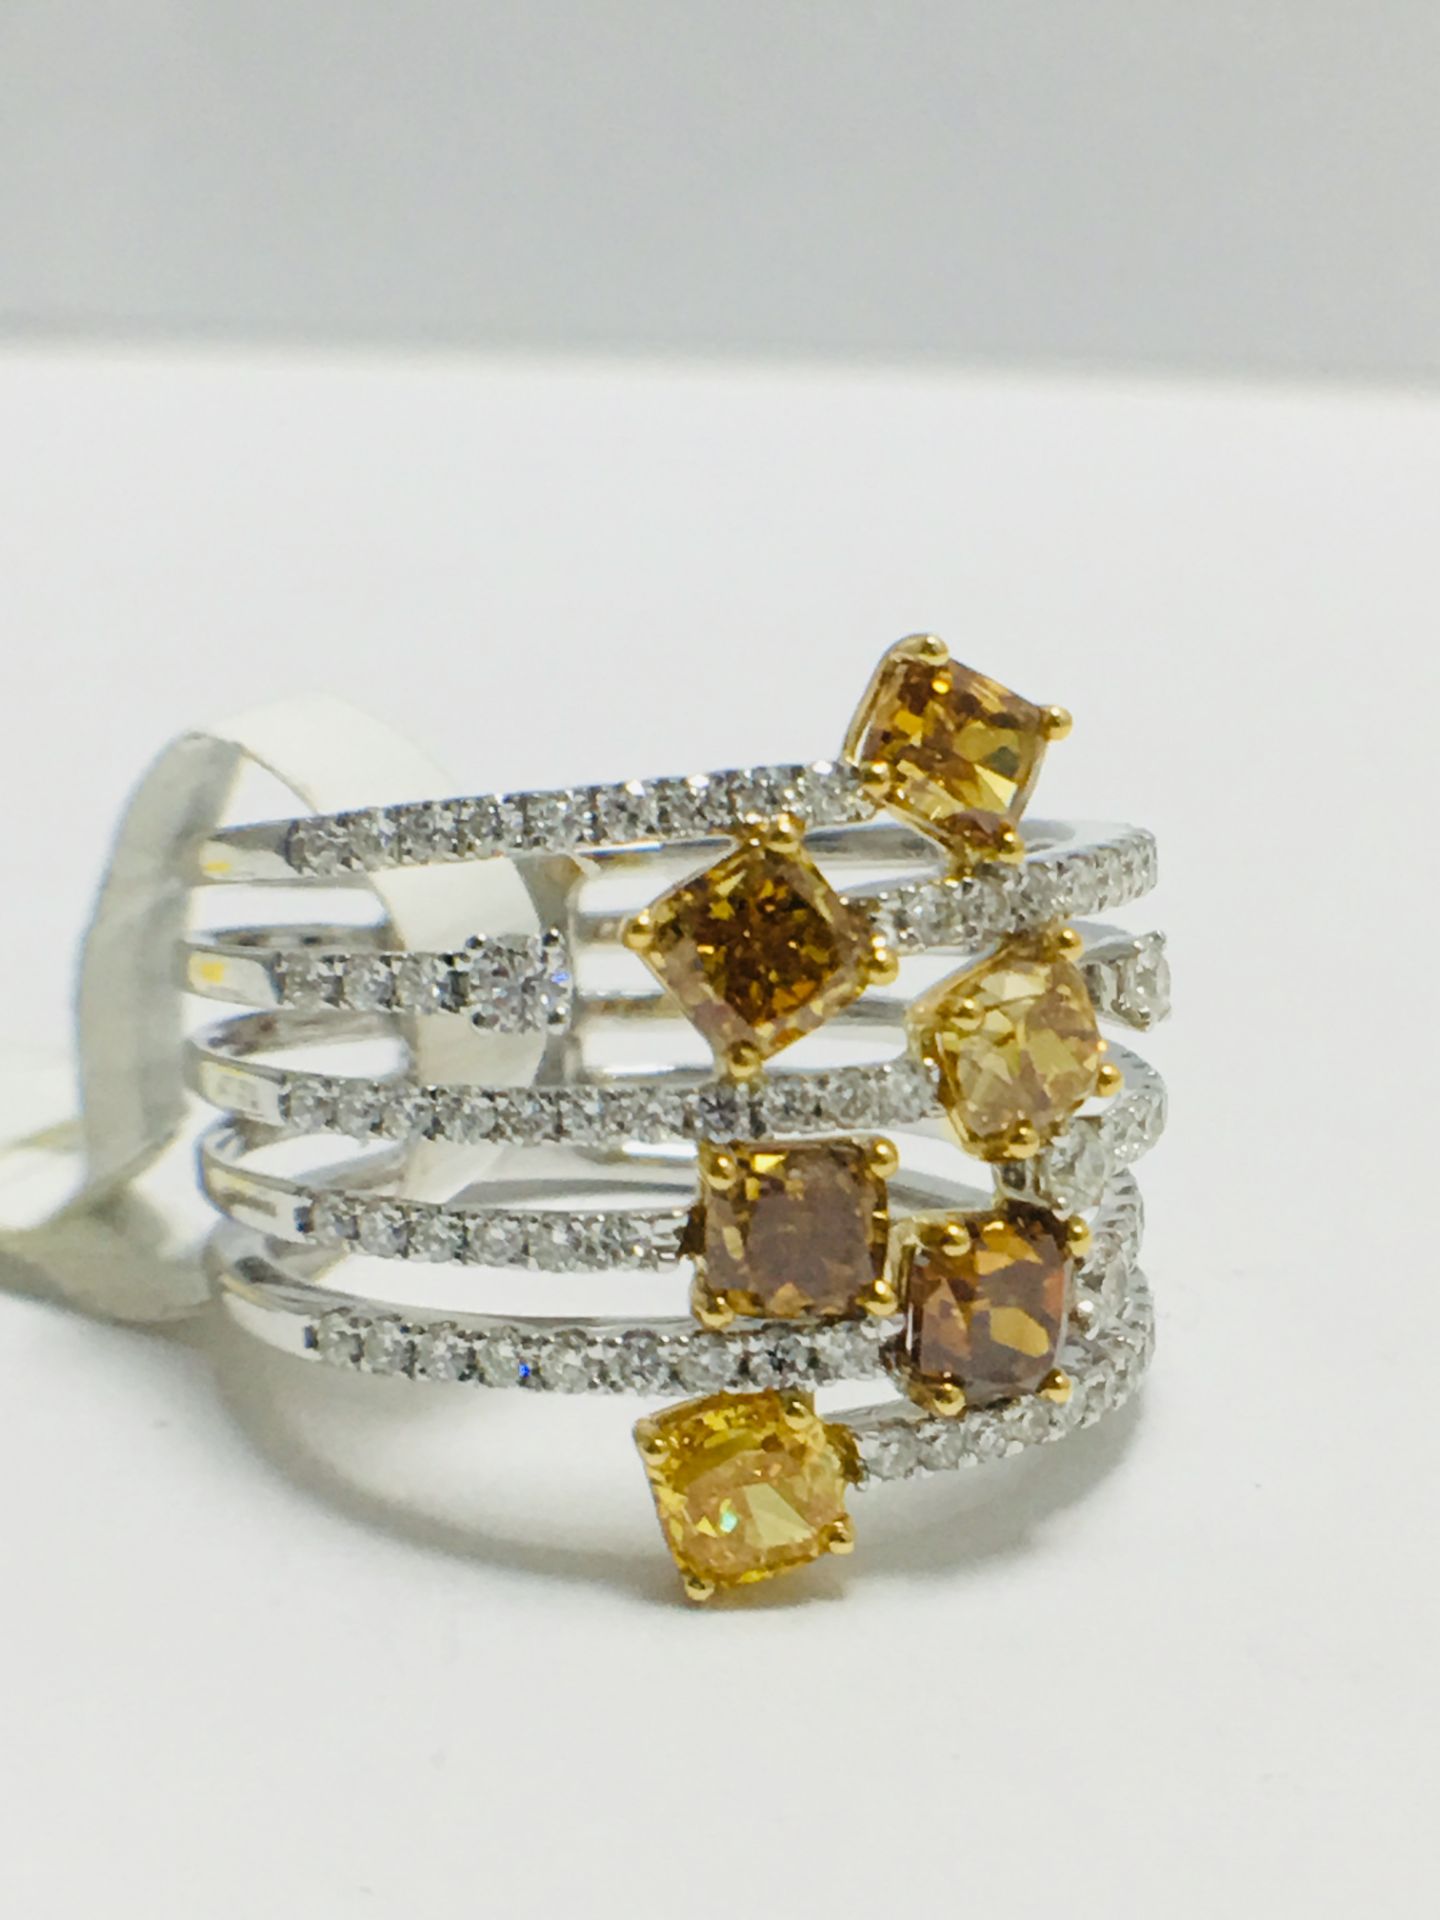 18ct Fancy Colour Diamond Ring - Image 6 of 10